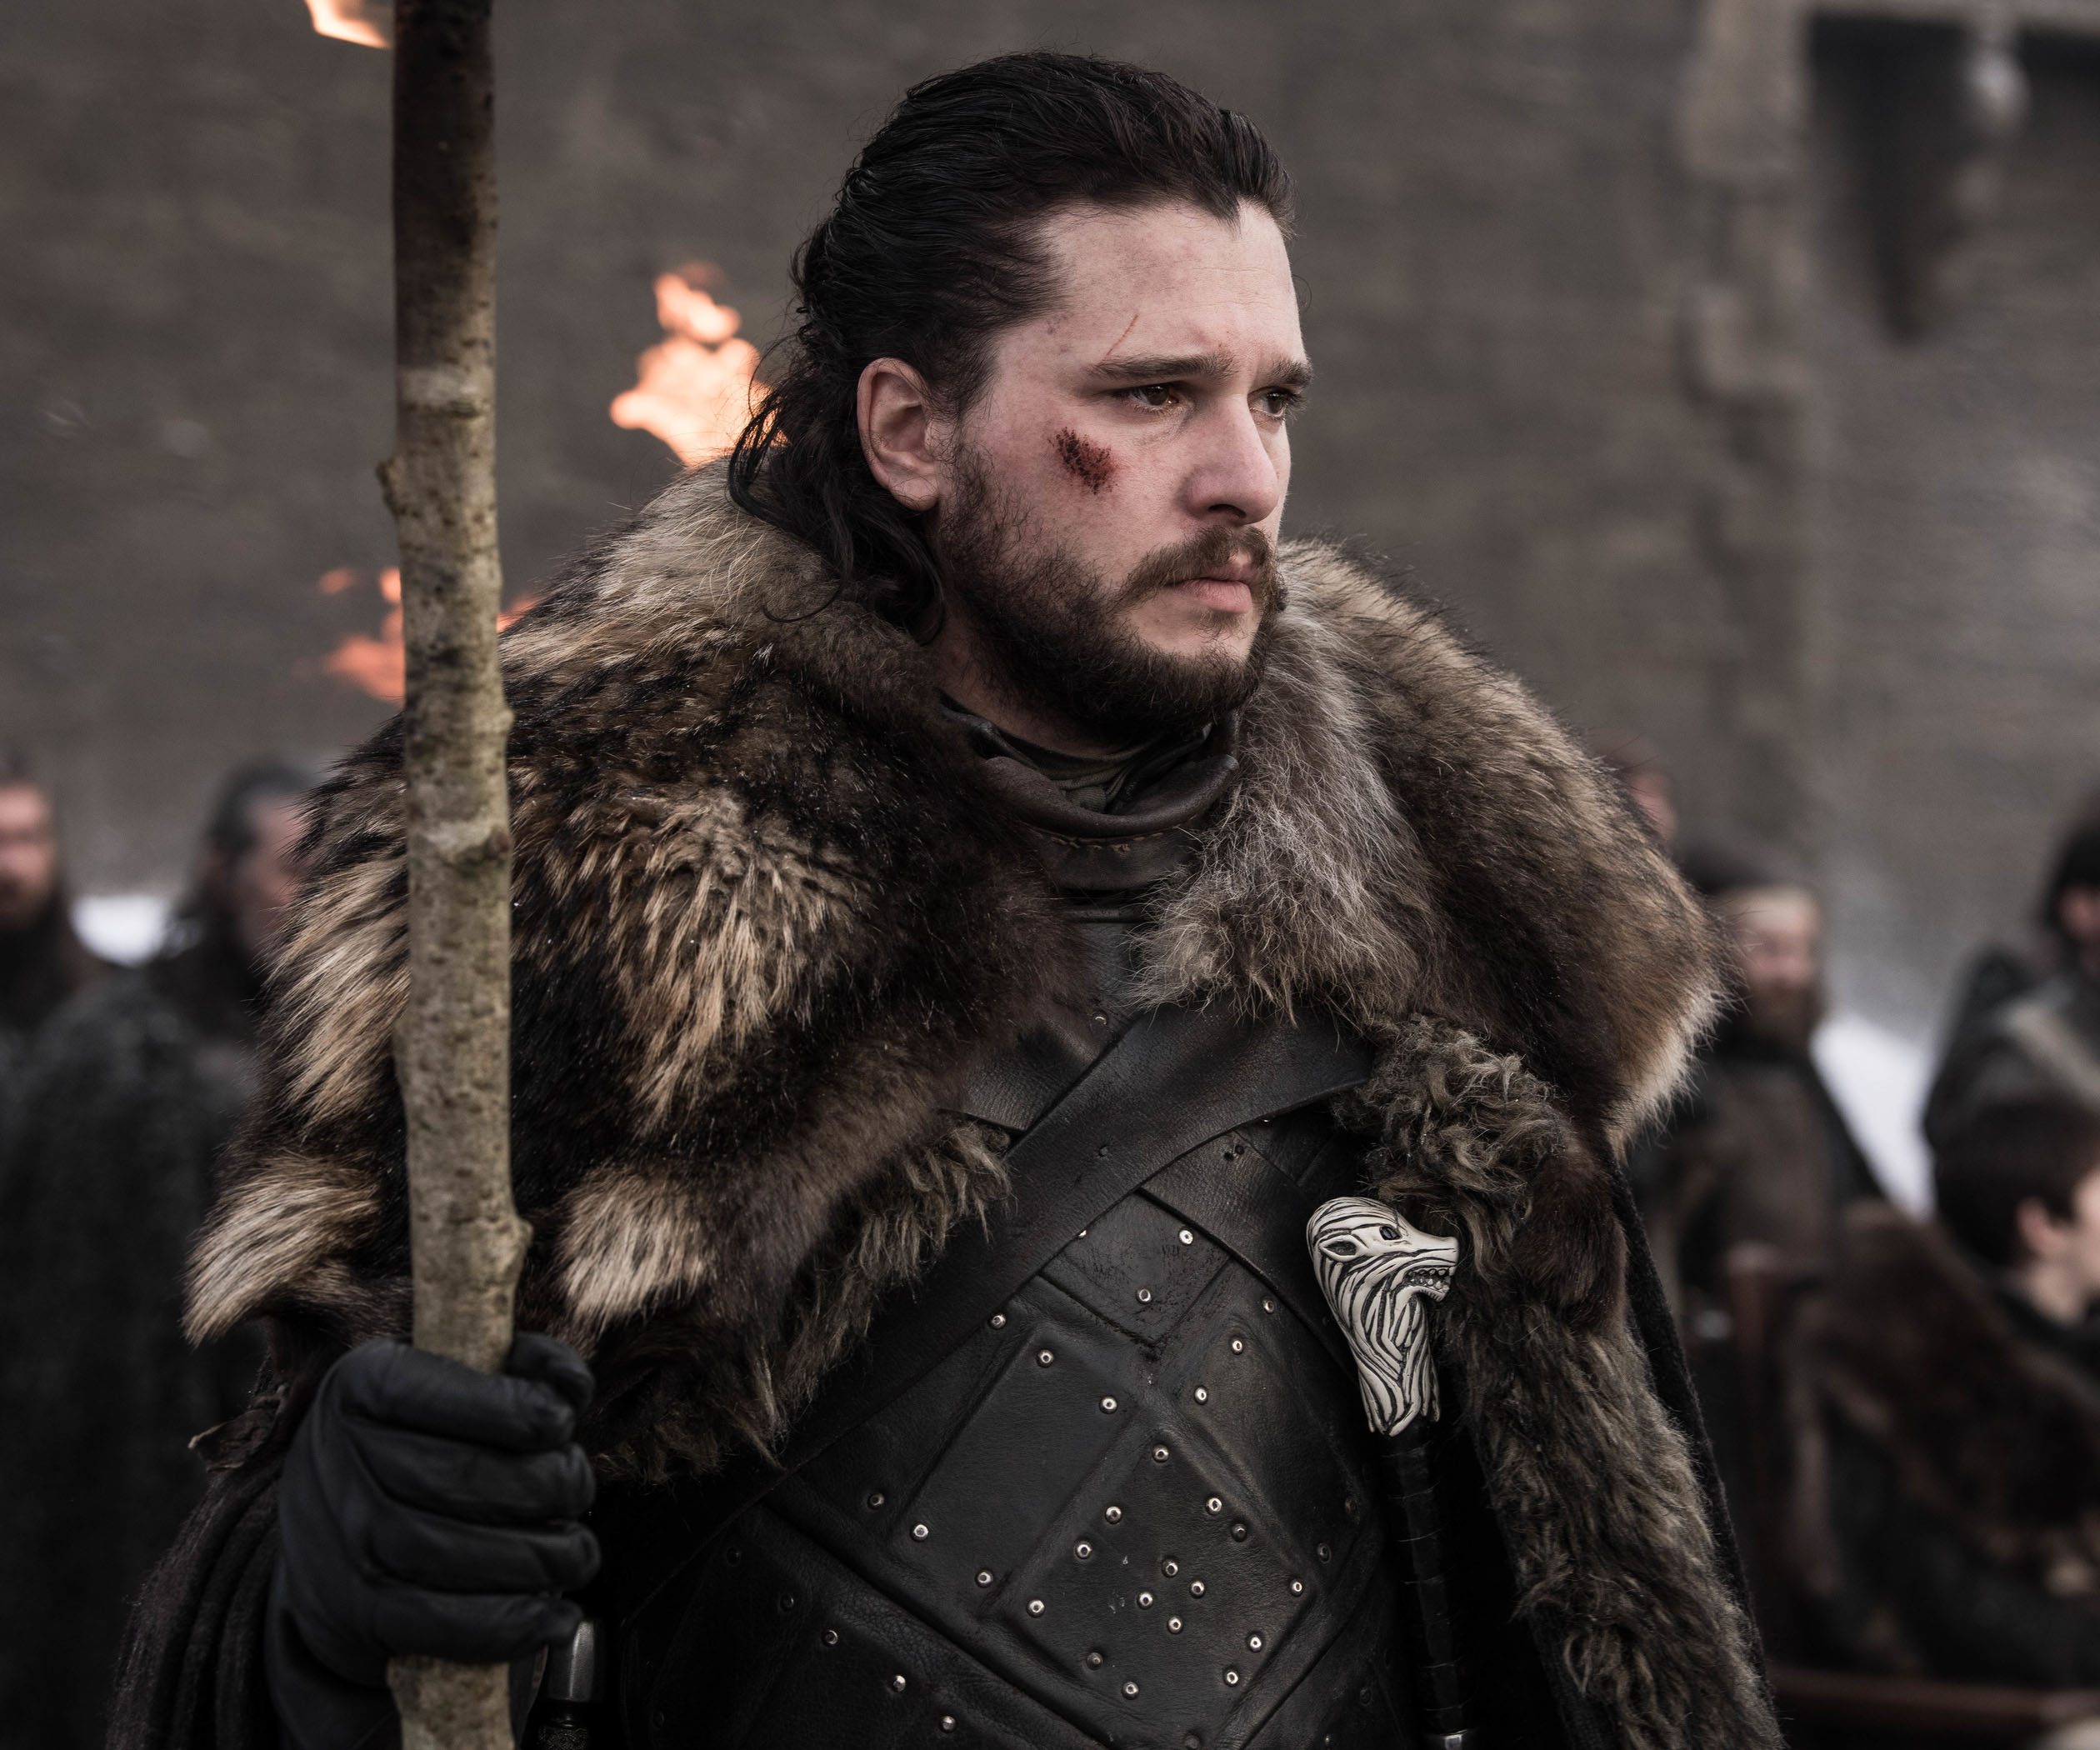 Why Jon Didn’t Say Goodbye to Ghost on Game of Thrones